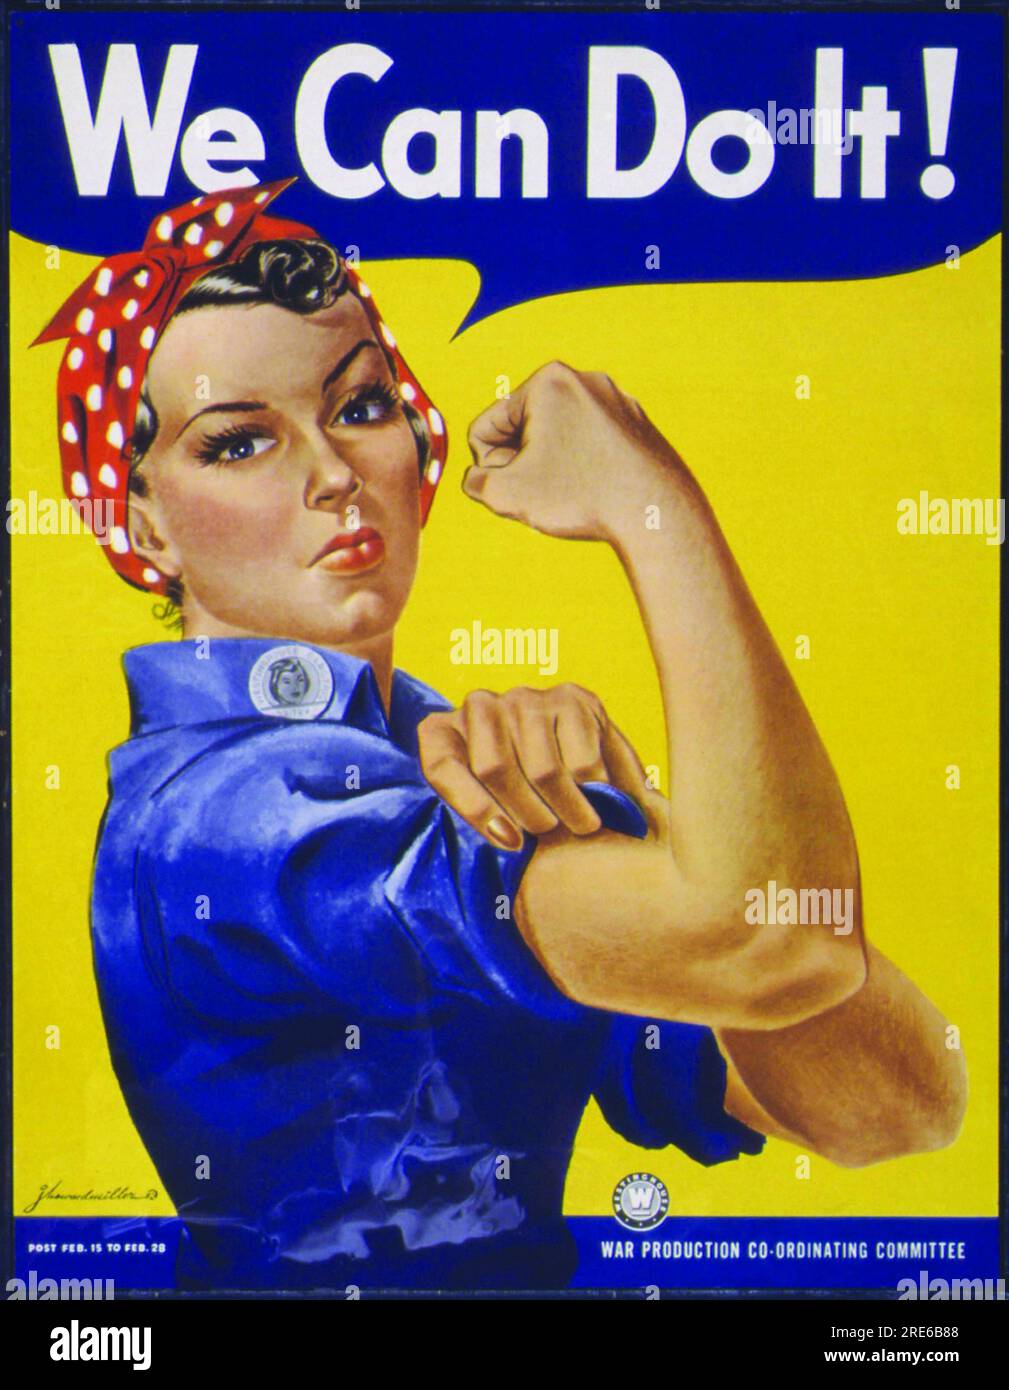 Title: 'We Can Do It!' Artist: J. Howard Miller (attributed to) Date: 1943 Dimensions: Not specified Medium: Poster Location: United States Stock Photo